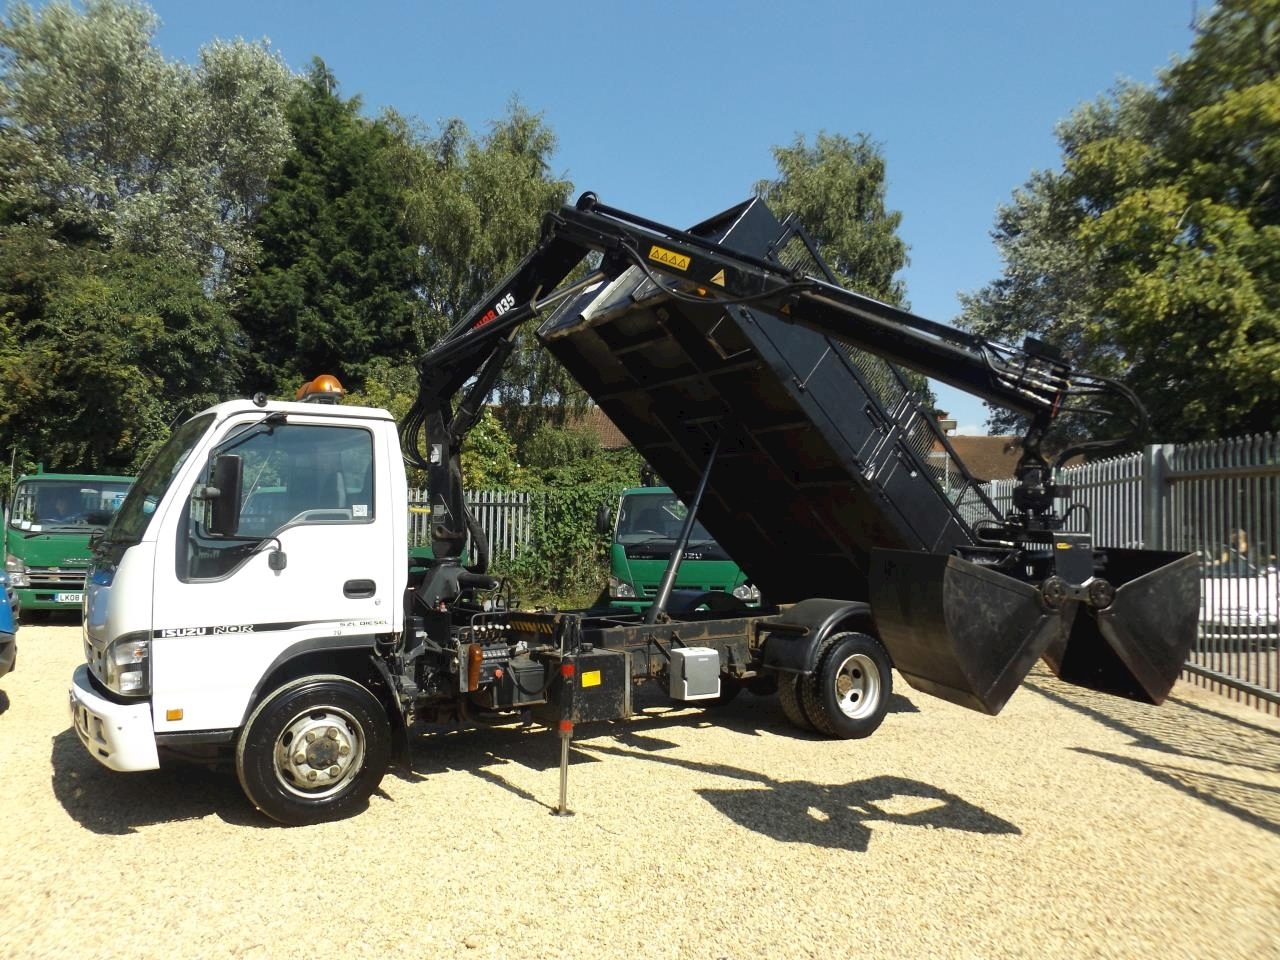 Nqr Tipper with Crane and Bucket Grab - 7.5T Manual Diesel